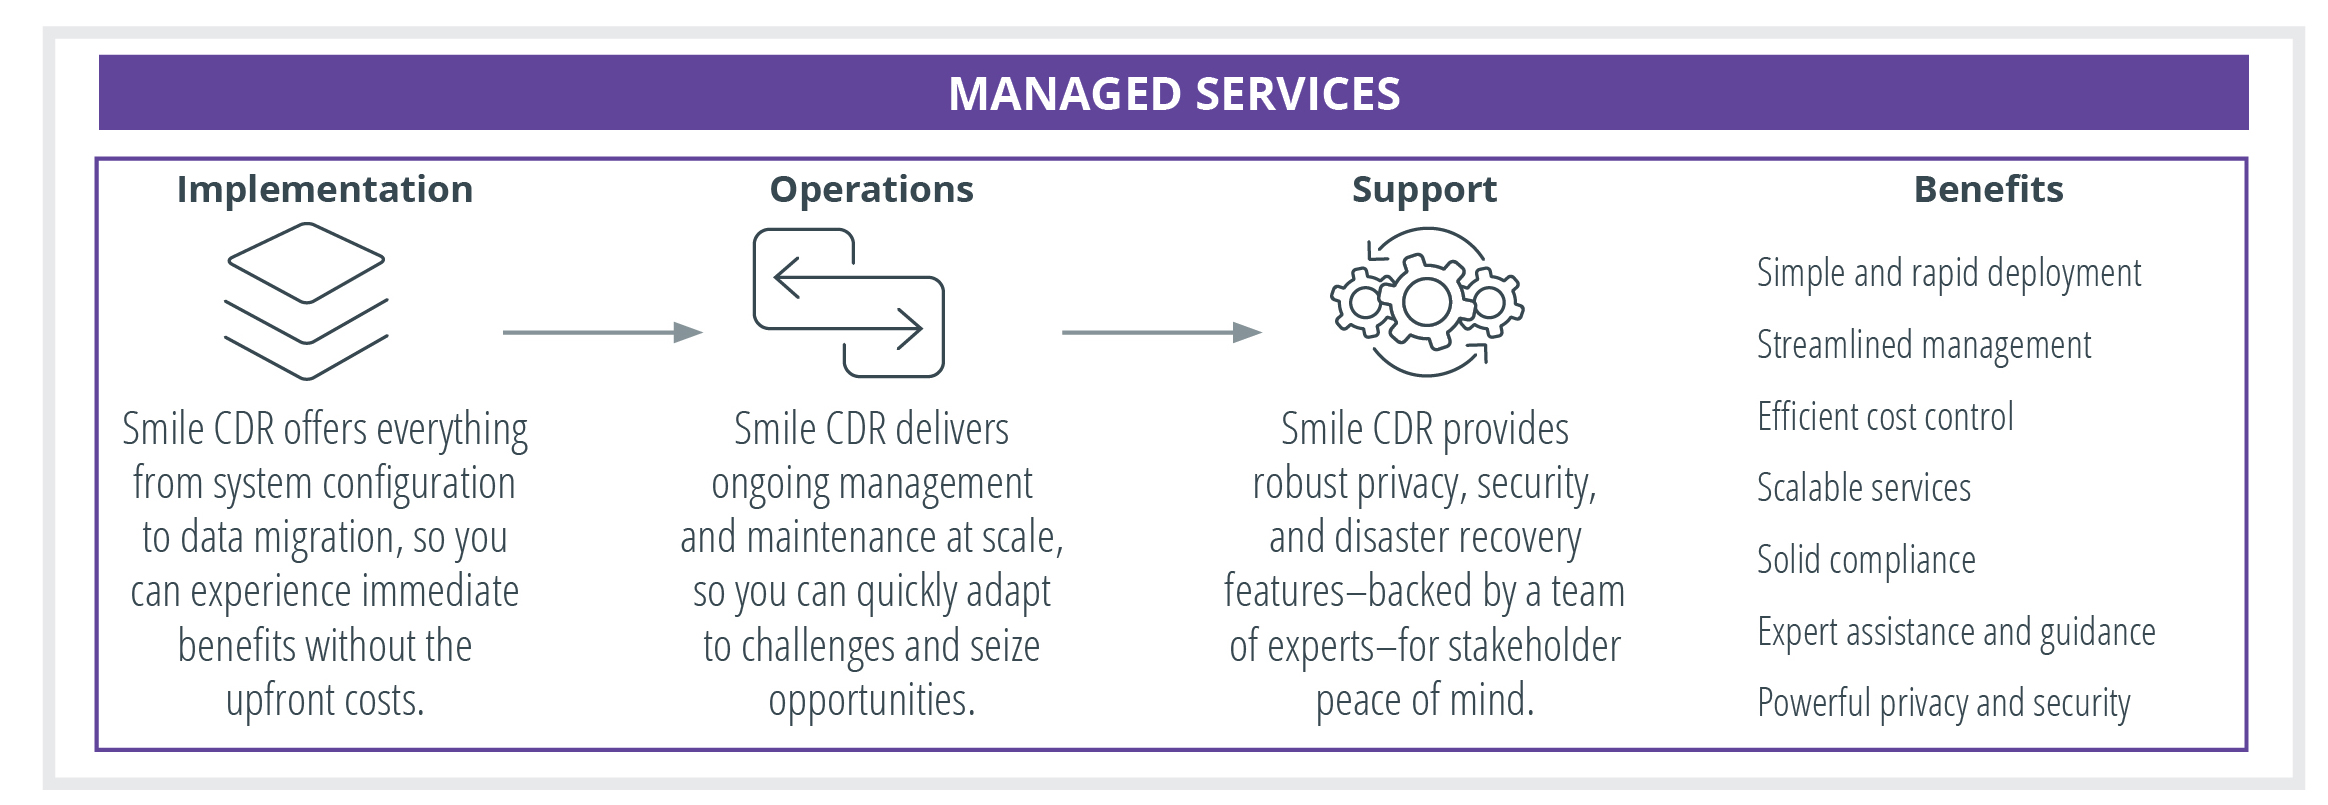 managed services chart_two